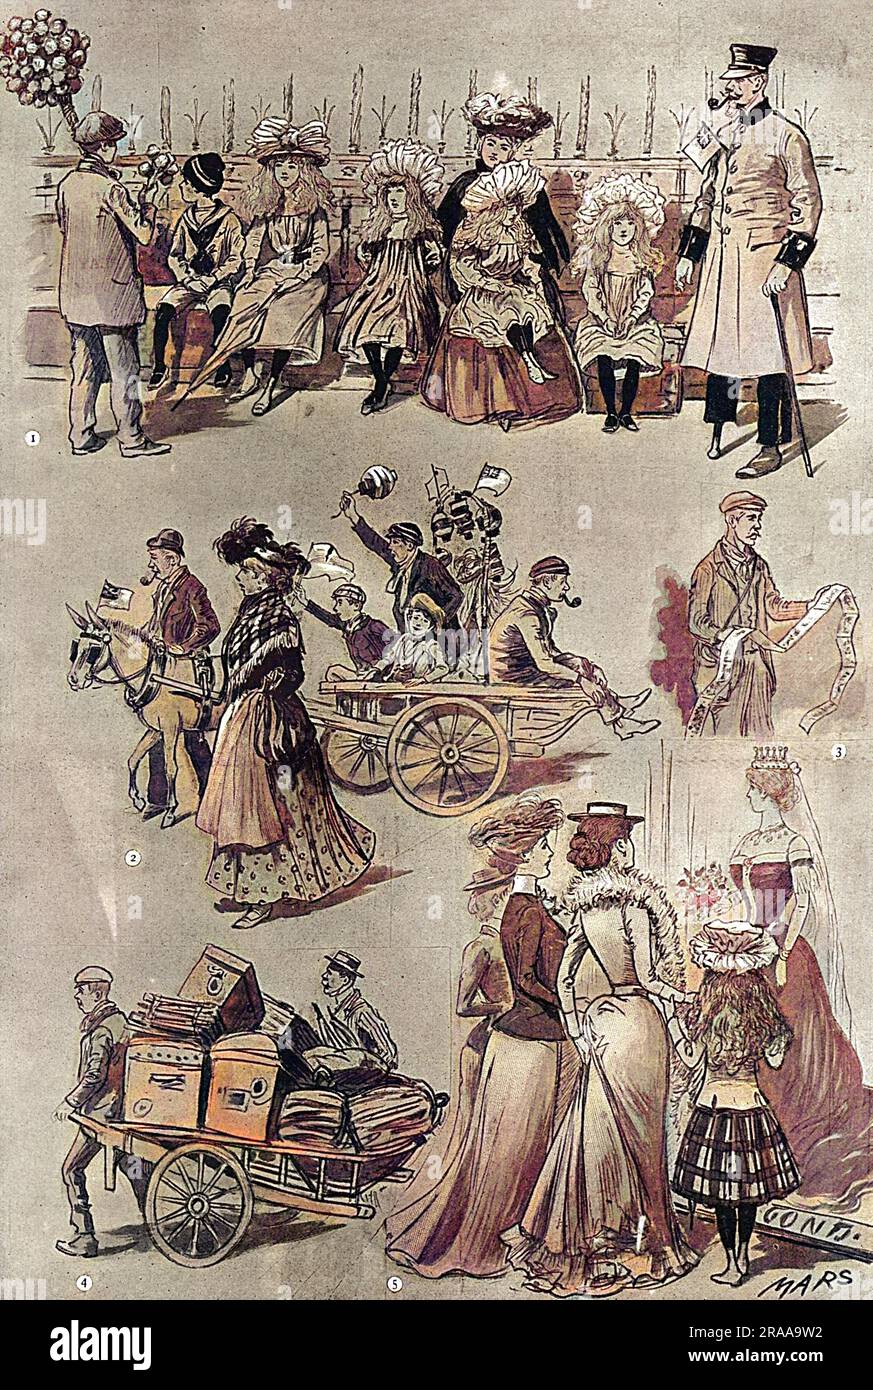 Random sketches taken in the streets by 'Mars' during the Coronation of King Edward VII. At the top, a boy sells blue flowers to several waiting spectators including a one-legged Chelsea Pensioner at the end. In the middle, a family from the East End of London travel in a trap or cart pulled by a donkey. To the right of them, a street vendor sells penny guides to the procession and in the bottom left, a man with numerous trunks and luggage searches for lodgings.     Date: 1902 Stock Photo